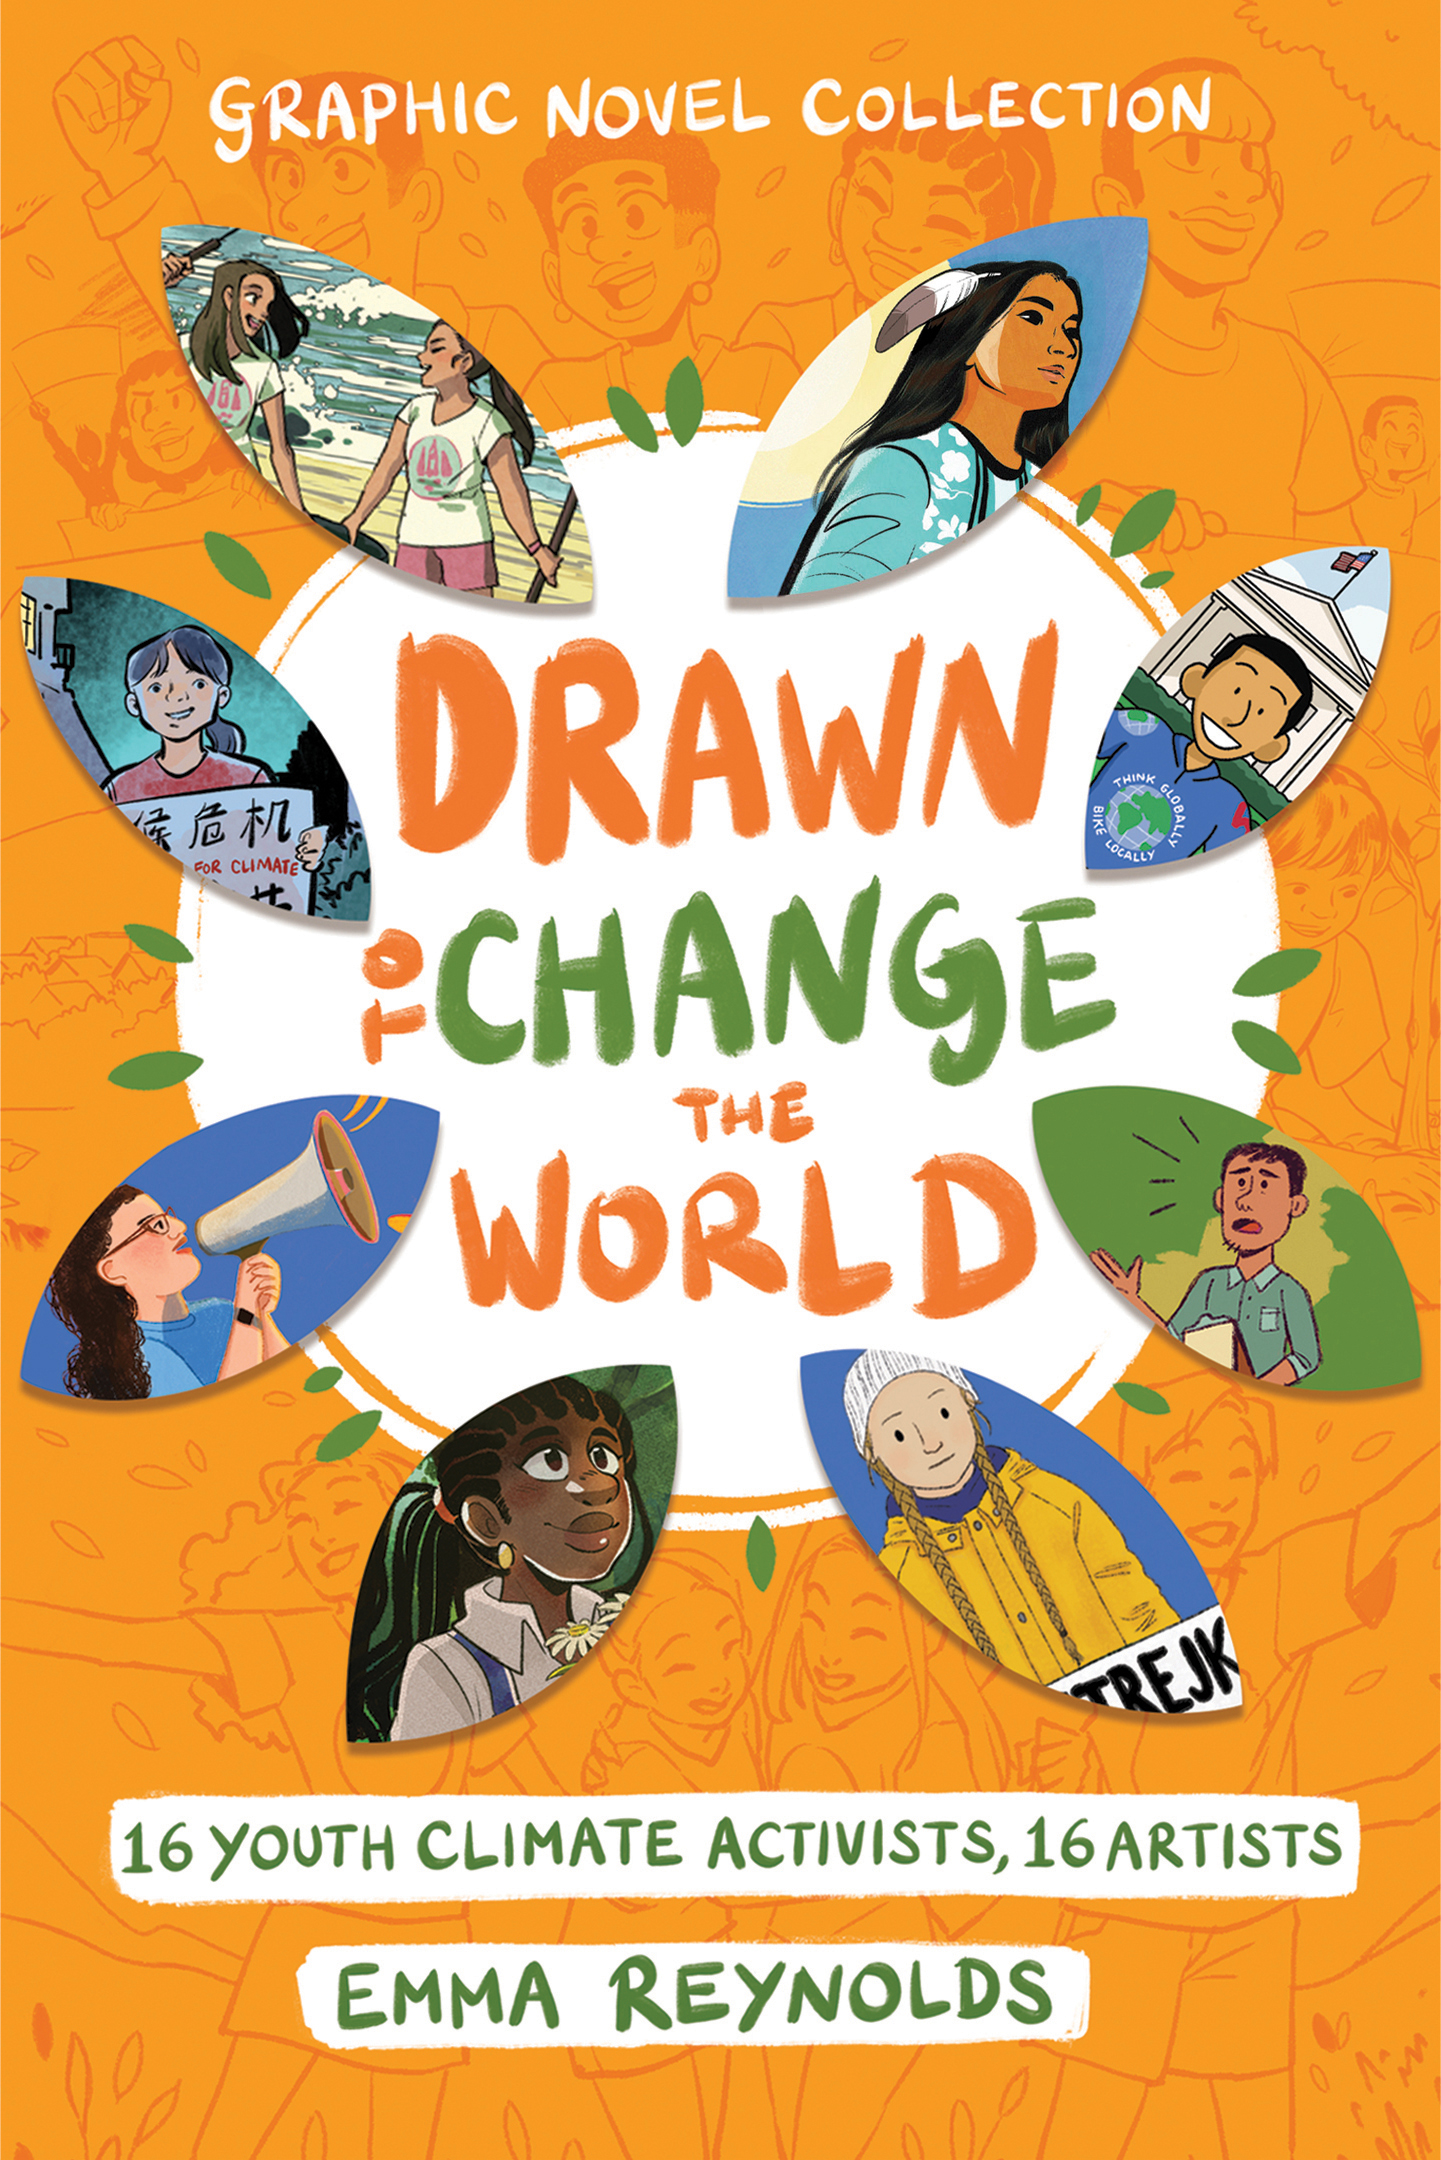 Image for "Drawn to Change the World Graphic Novel Collection"